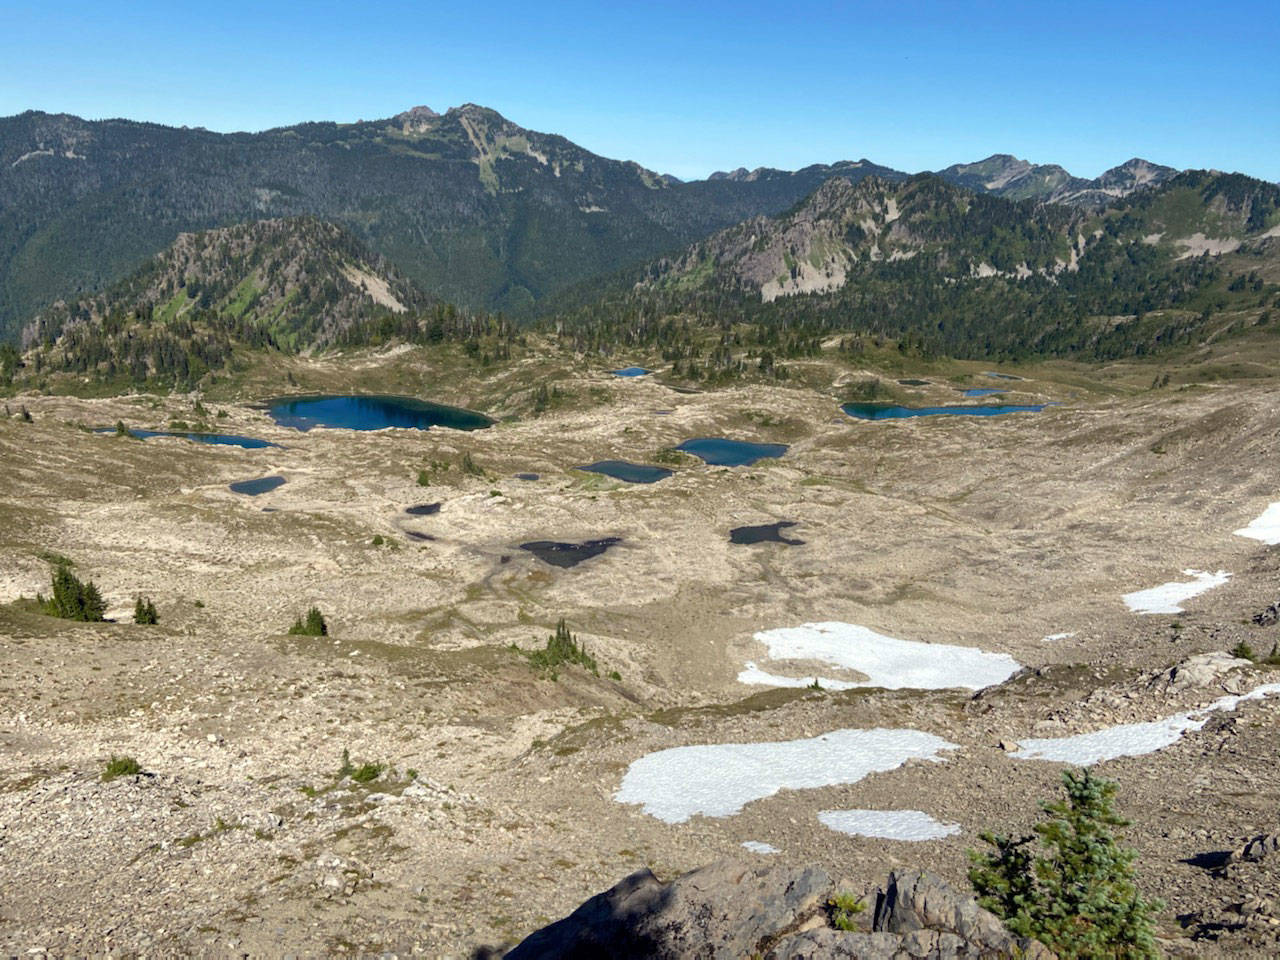 The alpine lakes of Seven Lakes Basin can be seen from Bogachiel Peak. (Rob Ollikainen/Peninsula Daily News)